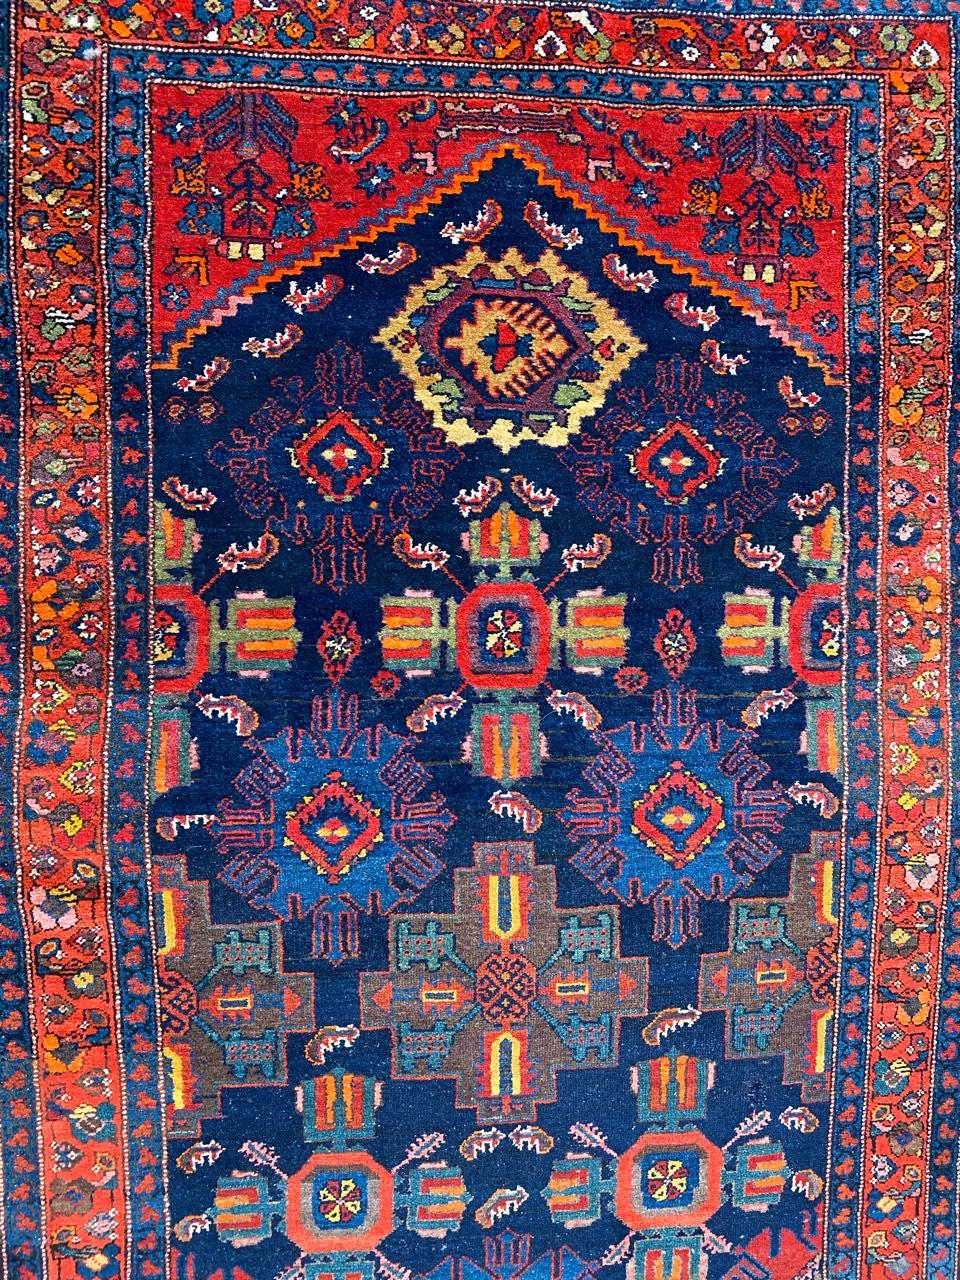 Very beautiful and colorful antique runner with beautiful decorative design and nice natural colors with blue, red, green, orange and yellow, entirely and finely hand knotted with wool velvet on cotton foundation.